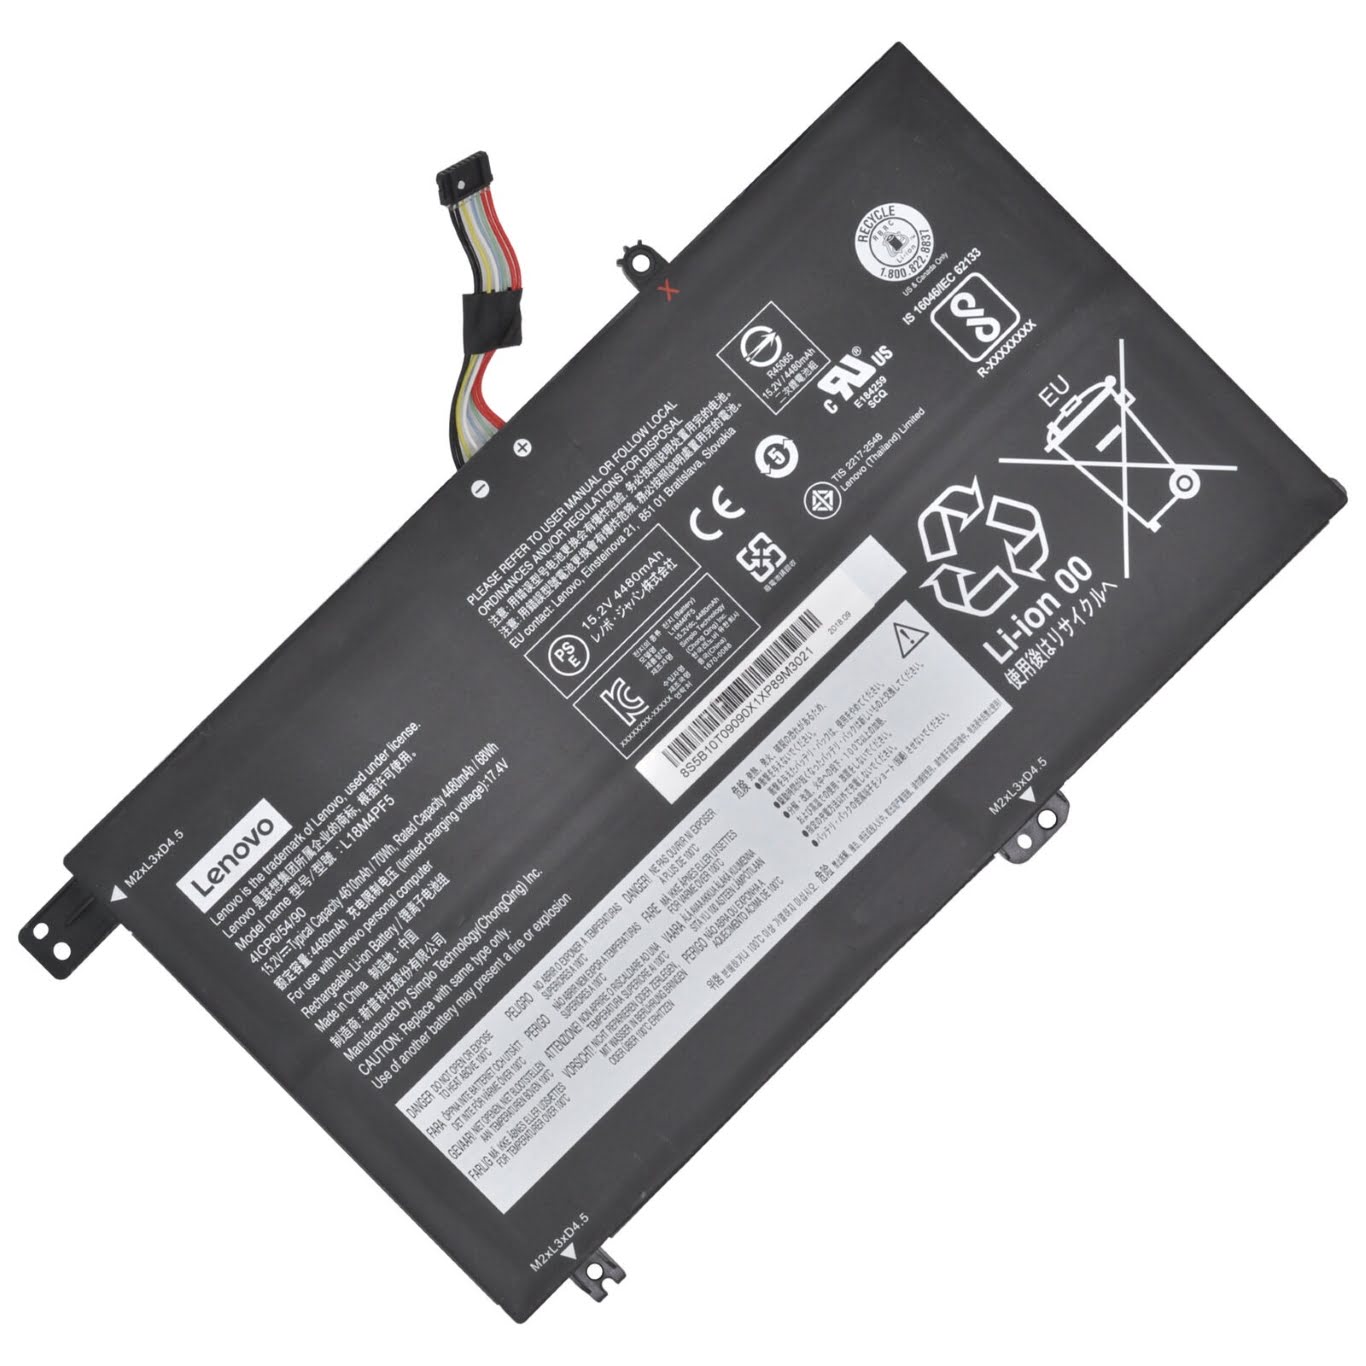 5B10T09088, 5B10W67275 replacement Laptop Battery for Lenovo IdeaPad S540, IdeaPad S540 15, 4 cells, 15.12v, 4630mah / 70wh